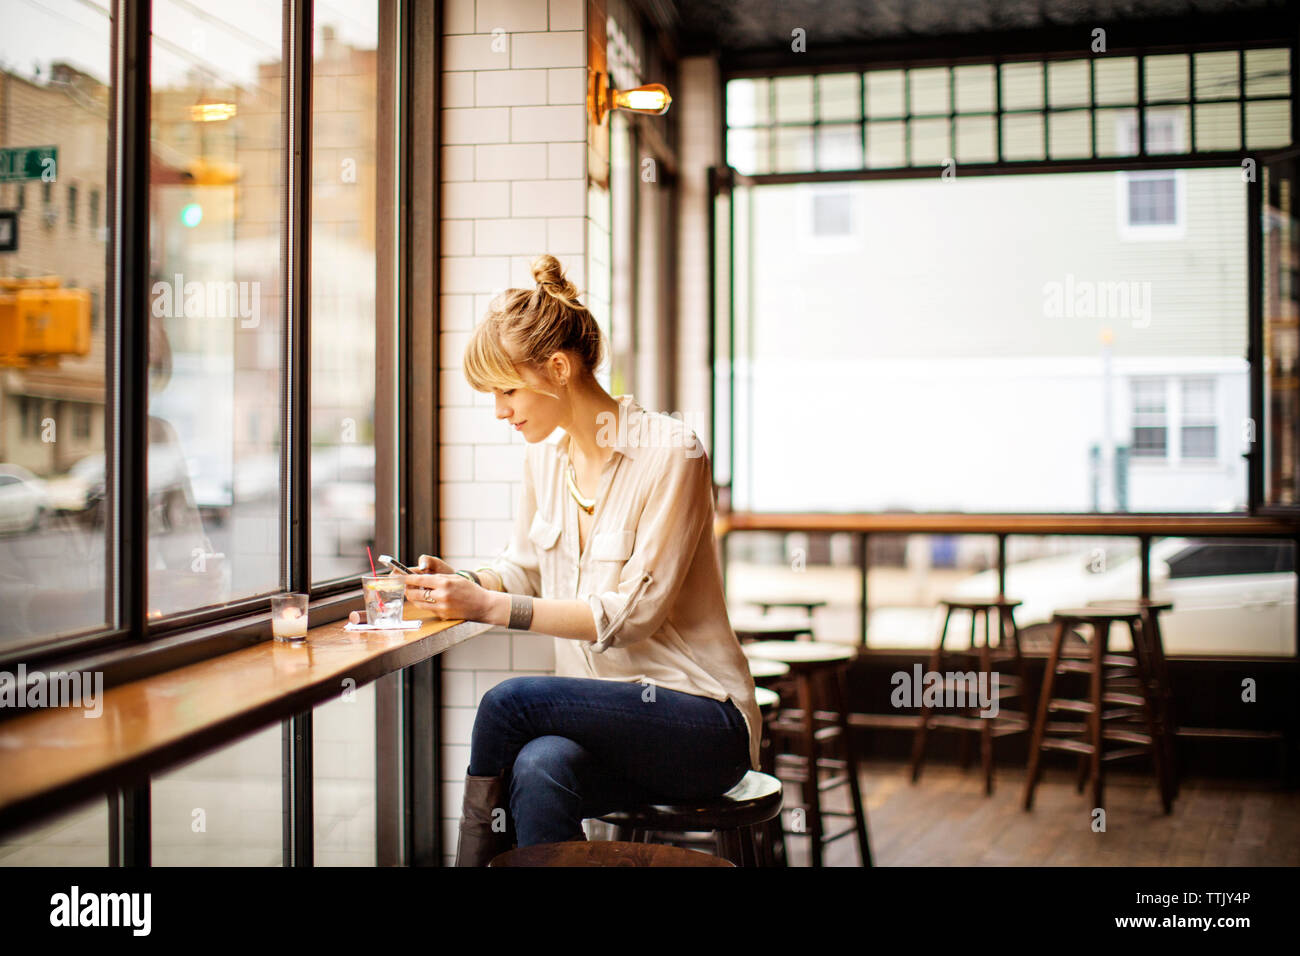 Woman using smart phone while sitting on stool in bar Stock Photo